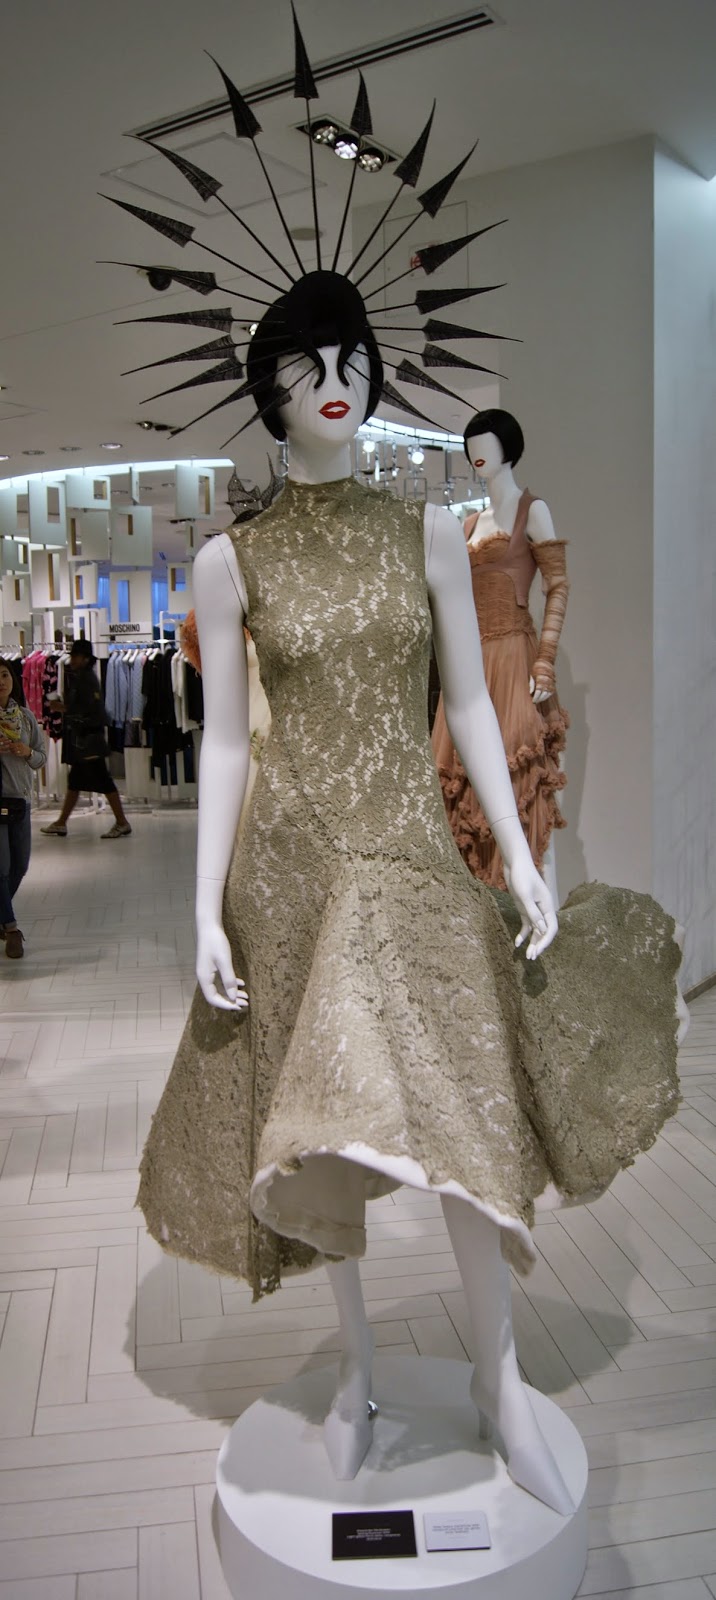 Fashion Blows Exhibit at Hudson's Bay in Toronto, Isabella, Daupne Guinness, Style, Culture, foundation, alexander mcqueen, philip treacy, suicide,the purple scarf, melanie.ps, ontario, canada, arrows of love, hat, fall, winter 1998, light green dress, spring, summer 1999